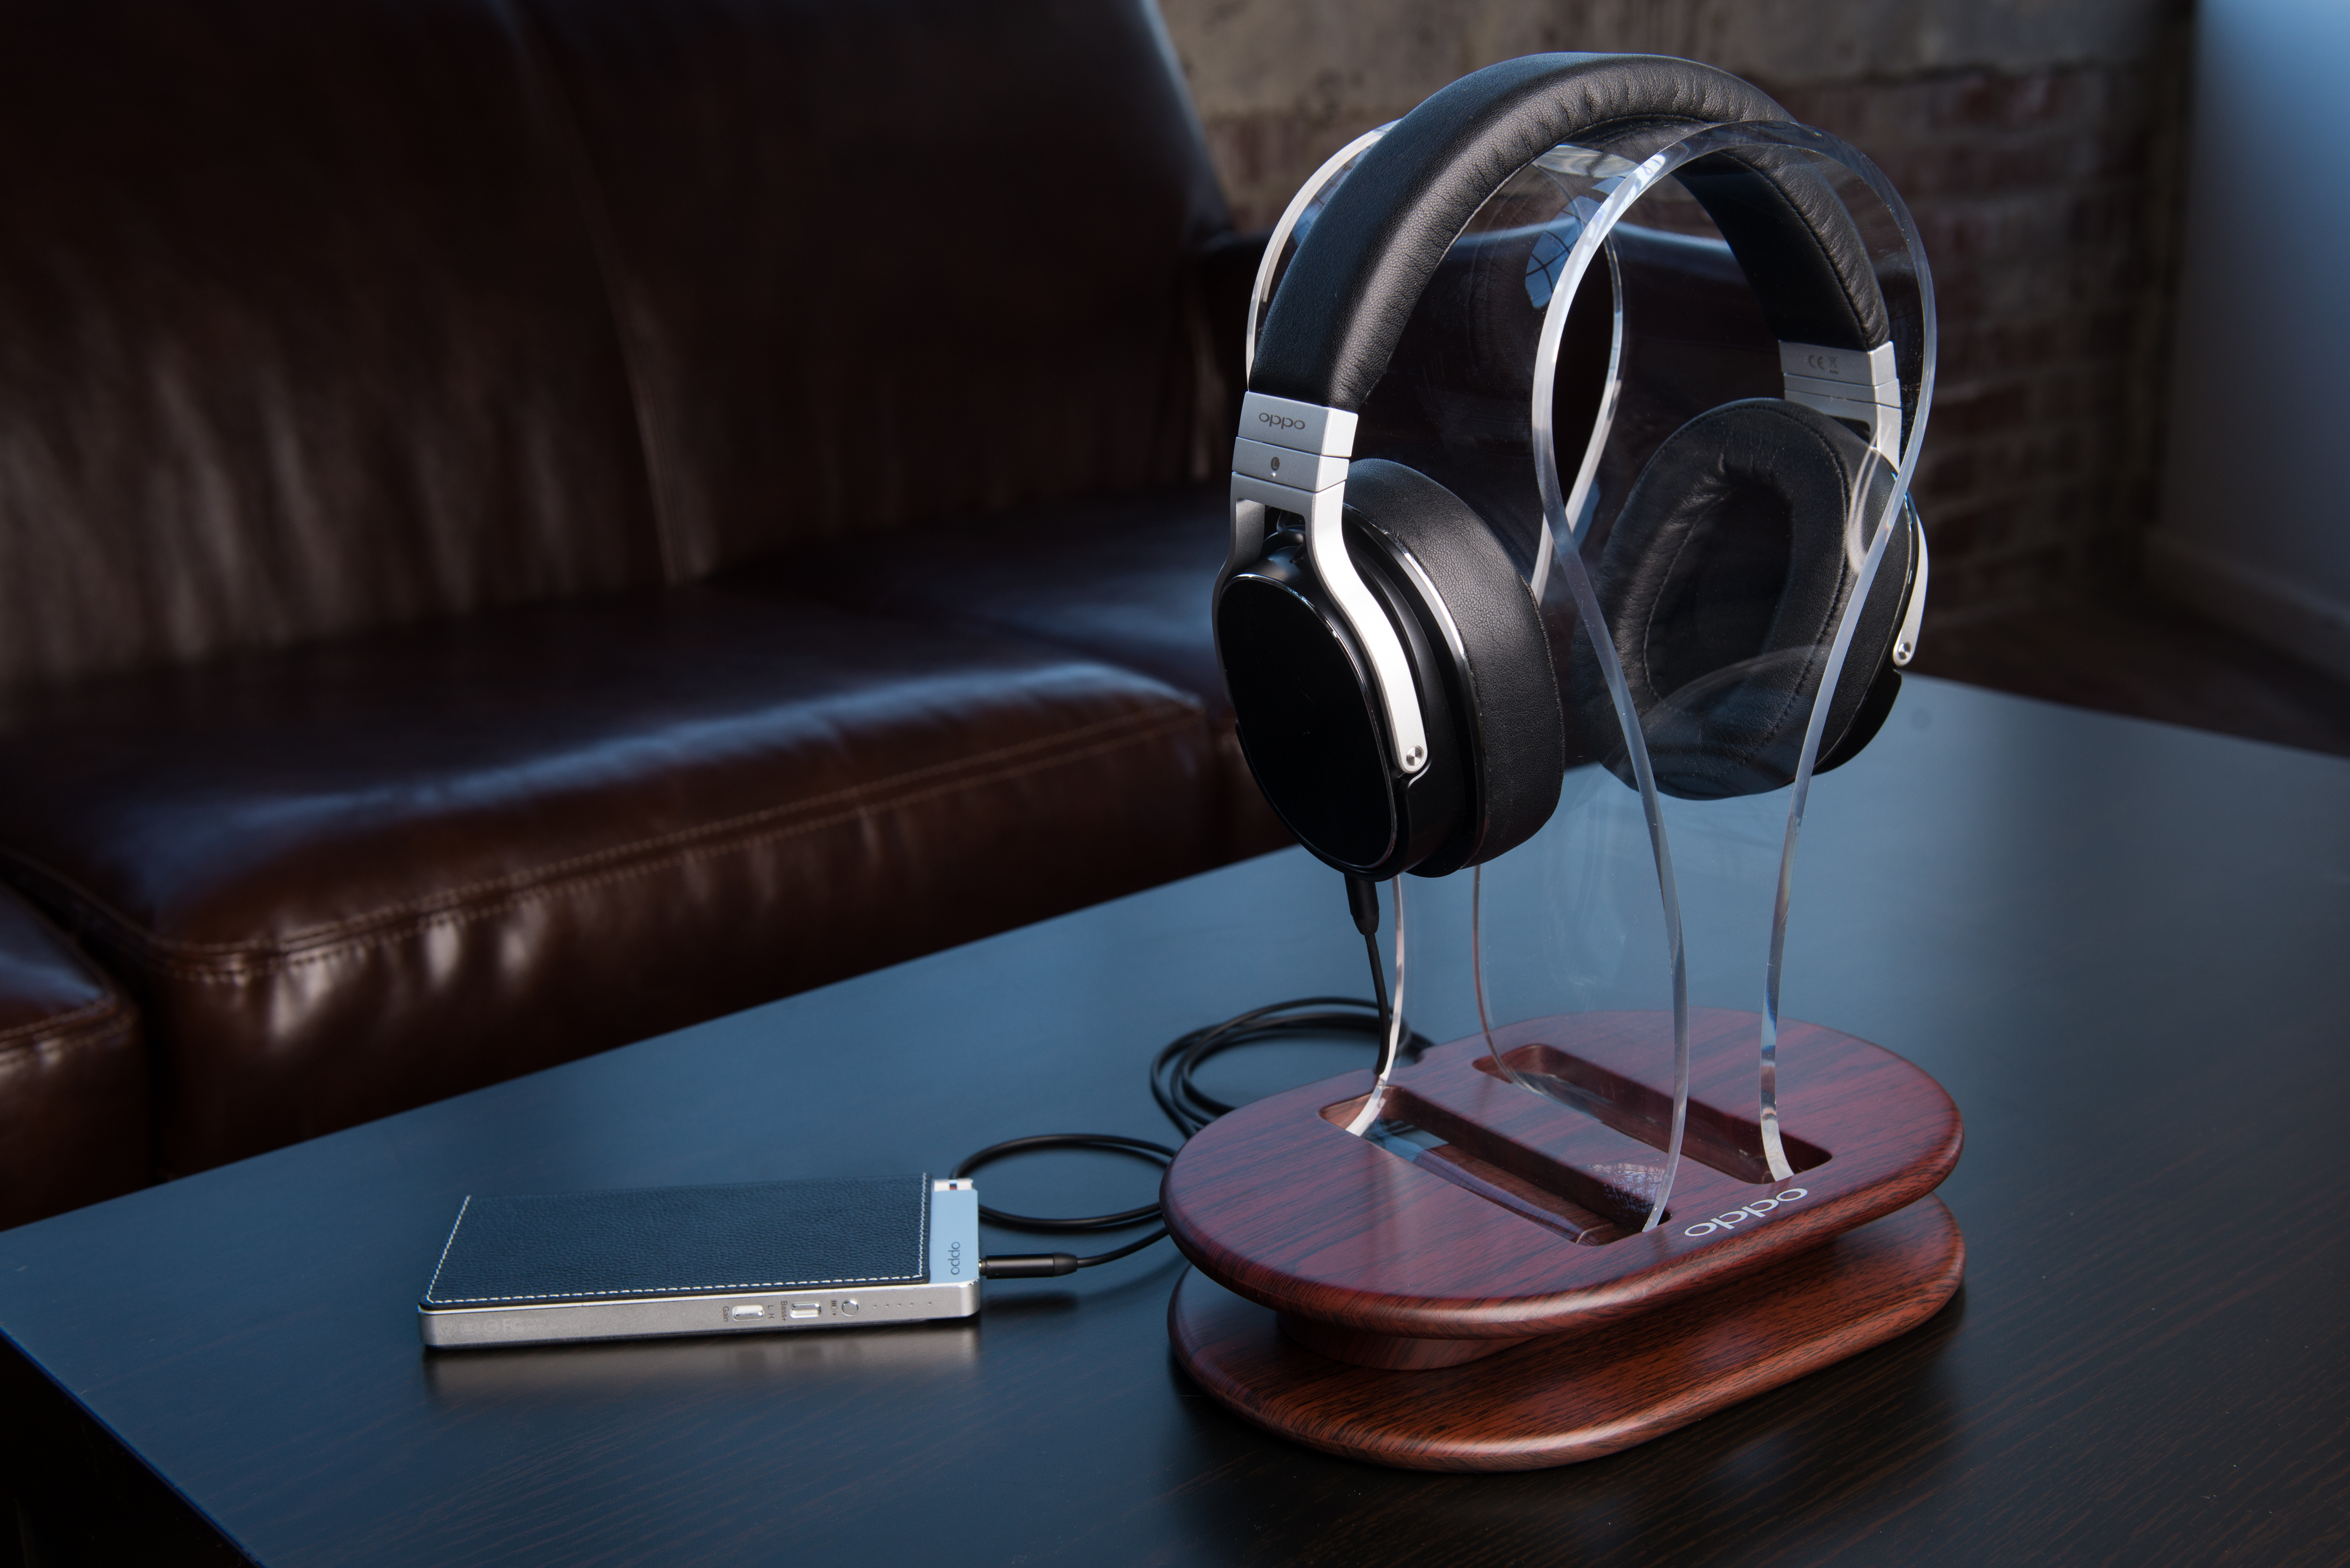 OPPO PM-3 Closed-Back Planar Magnetic Headphones